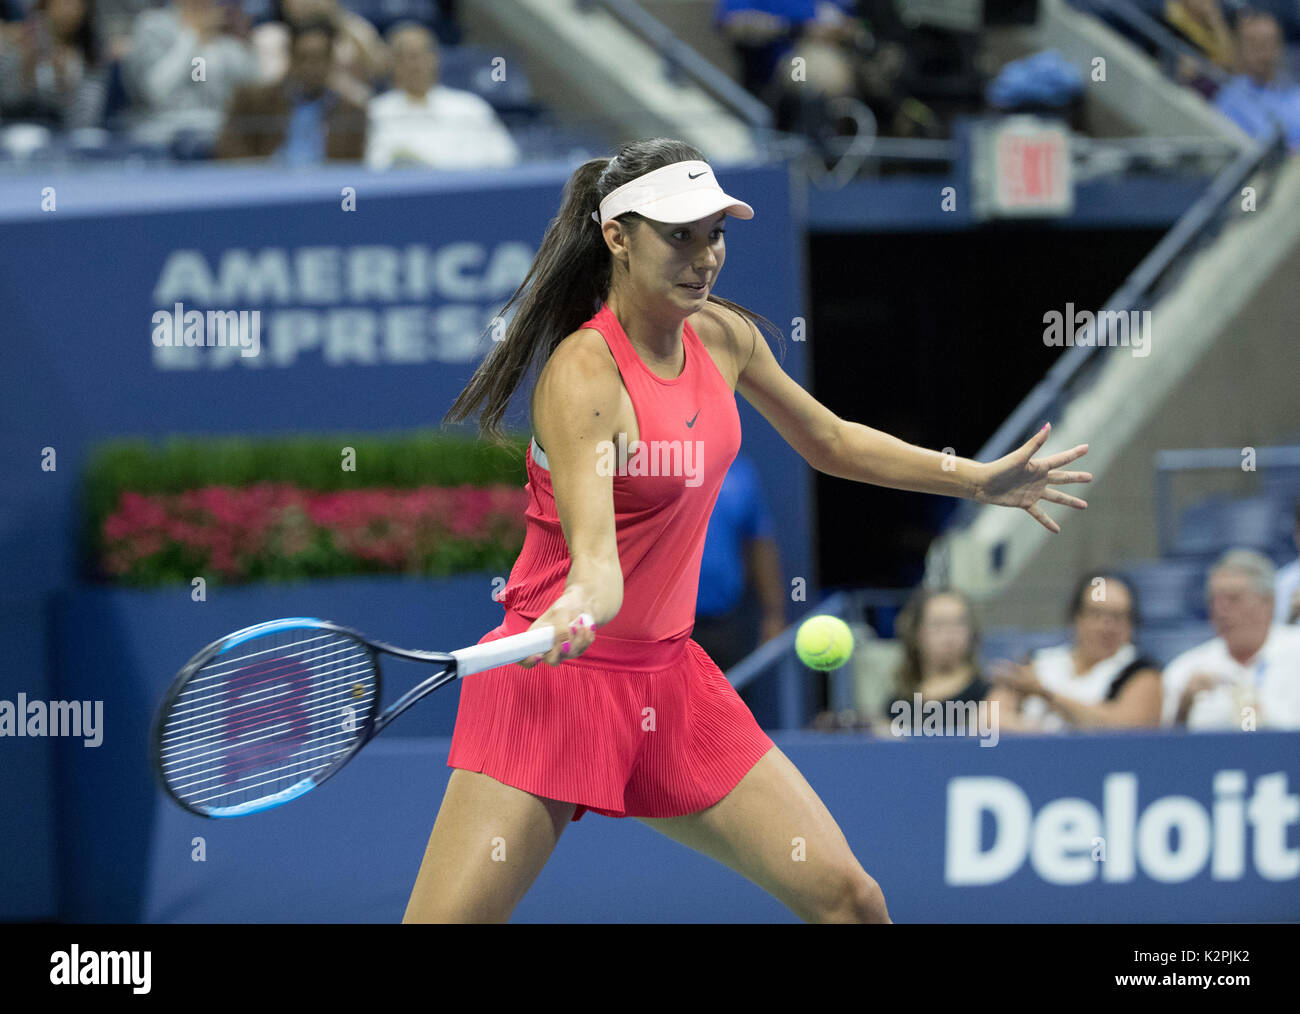 New York, United States. 30th Aug, 2017. New York, NY USA - August 30, 2017: Oceane Dodin of France returns ball during match against Venus Williams of USA at US Open Championships at Billie Jean King National Tennis Center Credit: lev radin/Alamy Live News Stock Photo